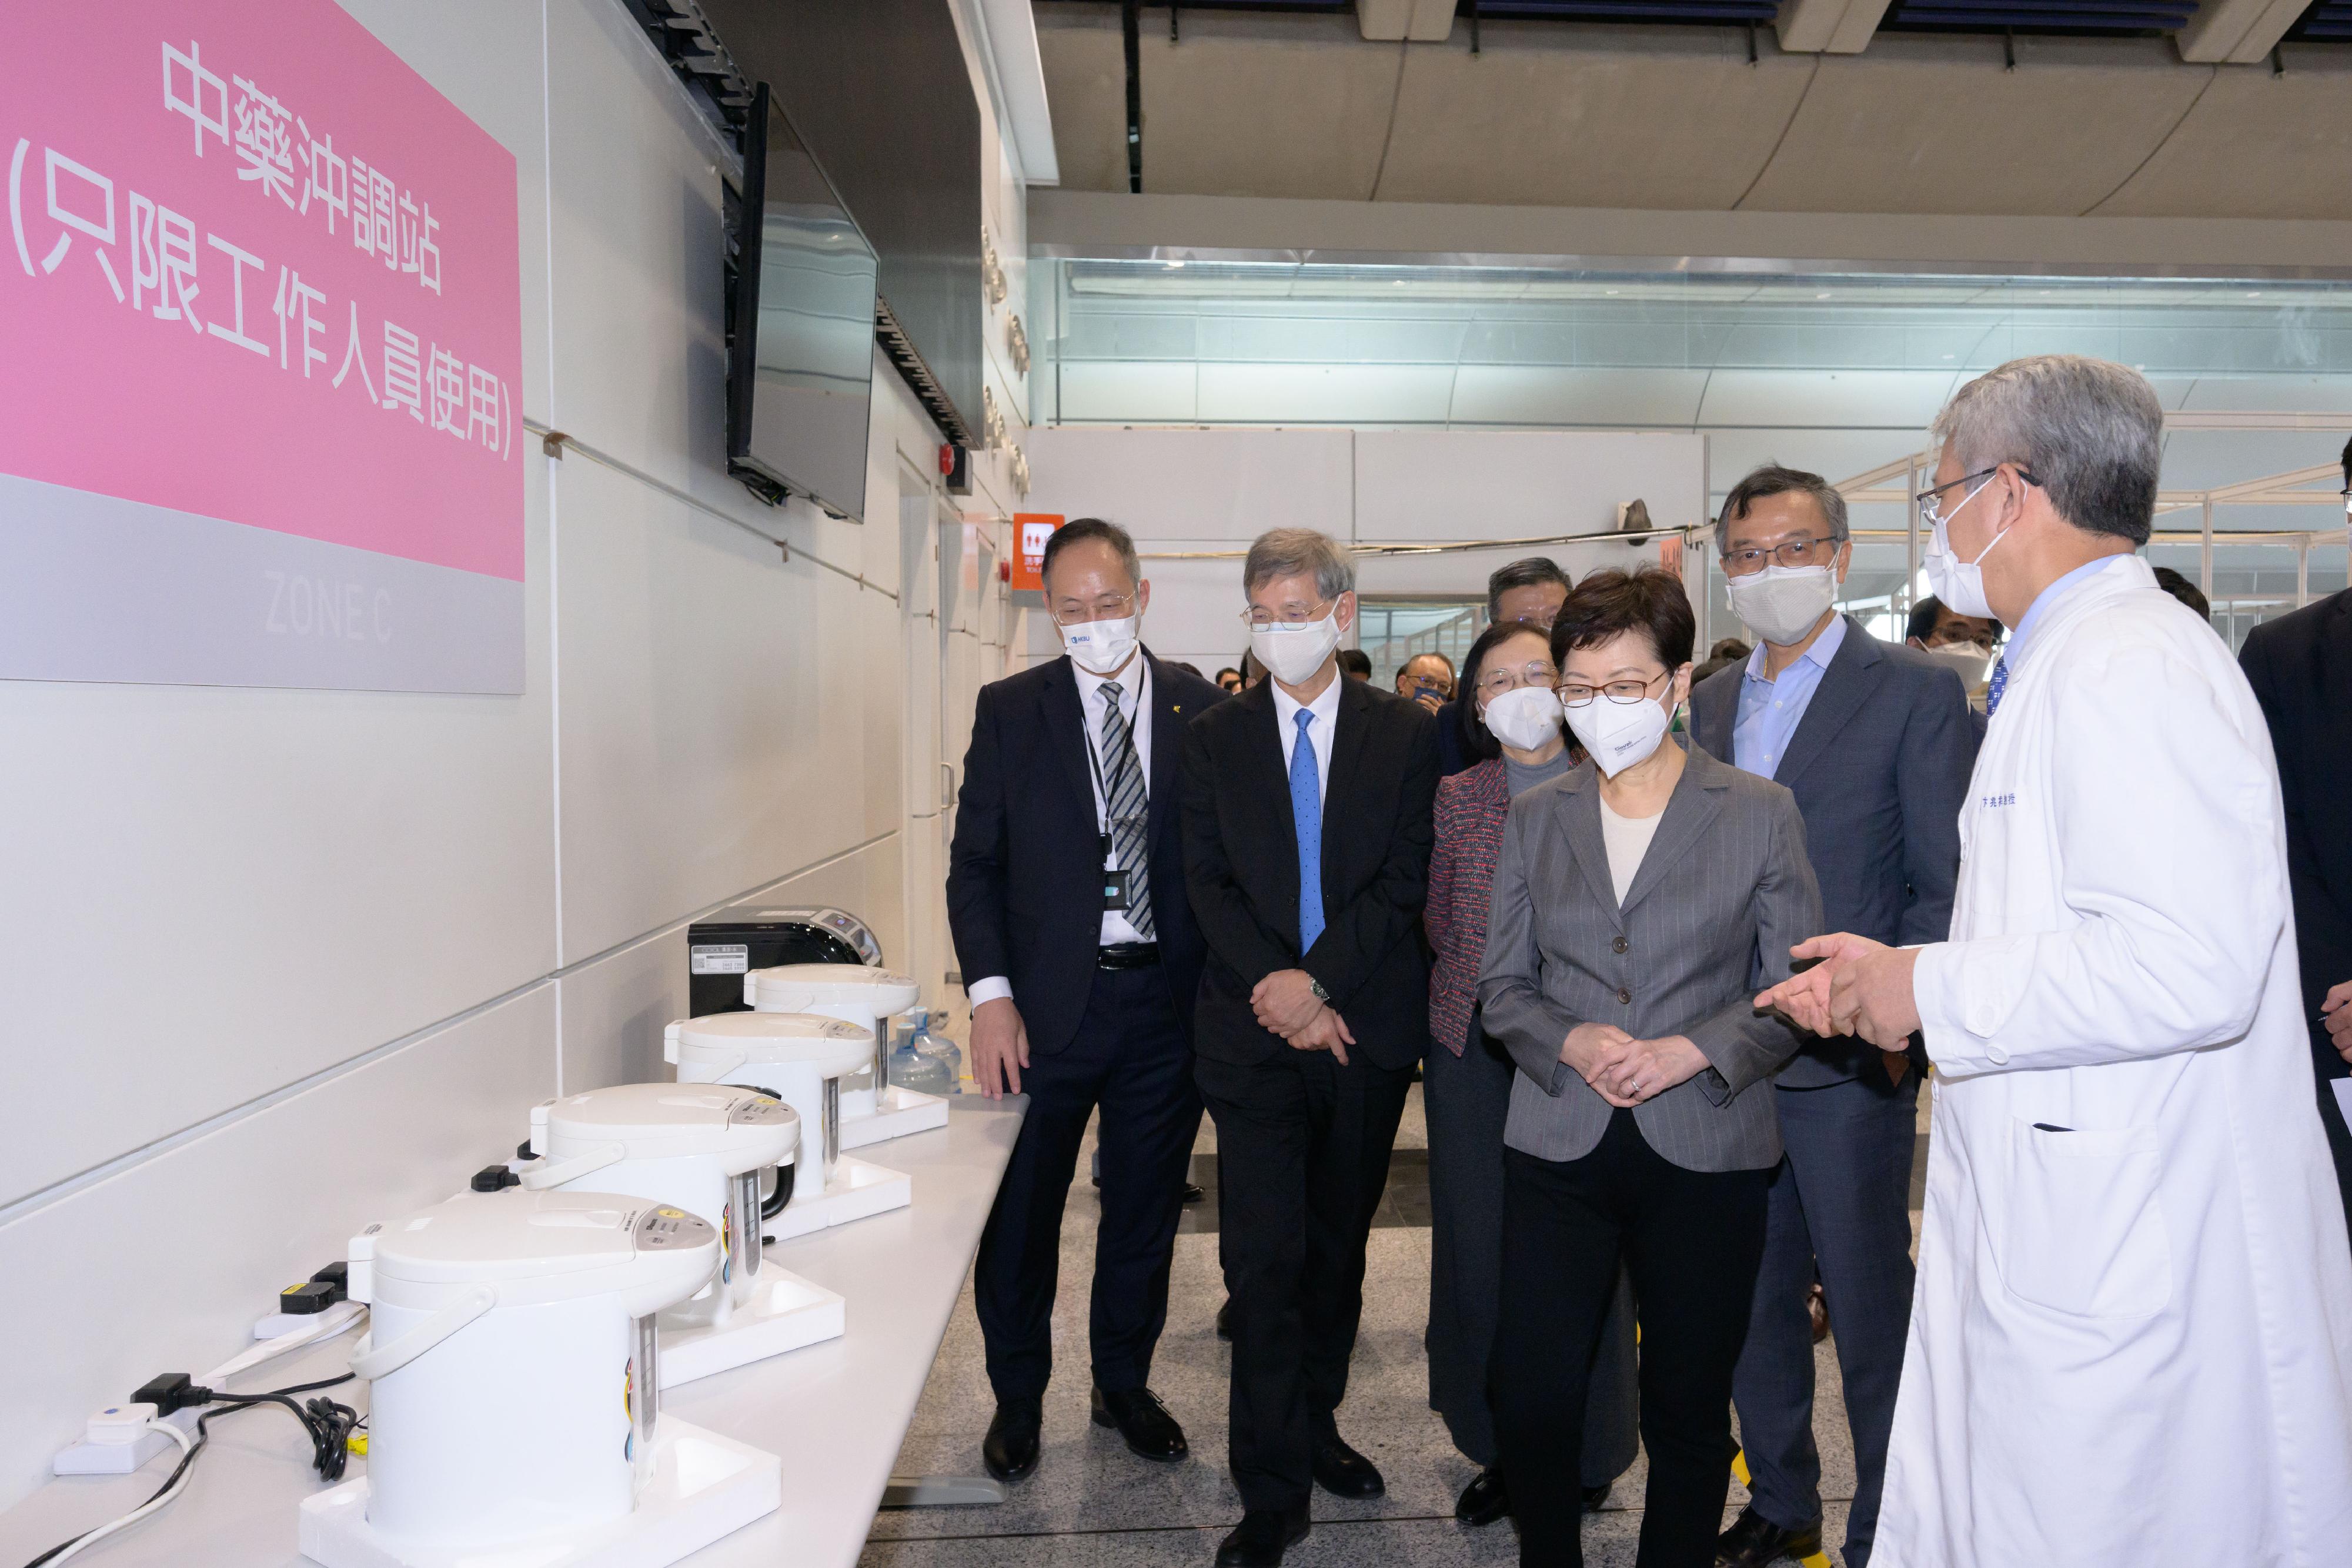 The Chief Executive, Mrs Carrie Lam, visited the Kai Tak Holding Centre today (March 30). Photo shows Mrs Lam (third right) being briefed by the Associate Vice-President (Chinese Medicine Development) of Hong Kong Baptist University (HKBU), Professor Bian Zhaoxiang (first right), on the facilities of the centre. Looking on are the Secretary for Labour and Welfare, Dr Law Chi-kwong (second left); the Secretary for Food and Health, Professor Sophia Chan (third left); the President and Vice-Chancellor of HKBU, Professor Alexander Wai (first left); and the Chief Executive Officer of Haven of Hope Christian Service, Dr Lam Ching-choi (second right).